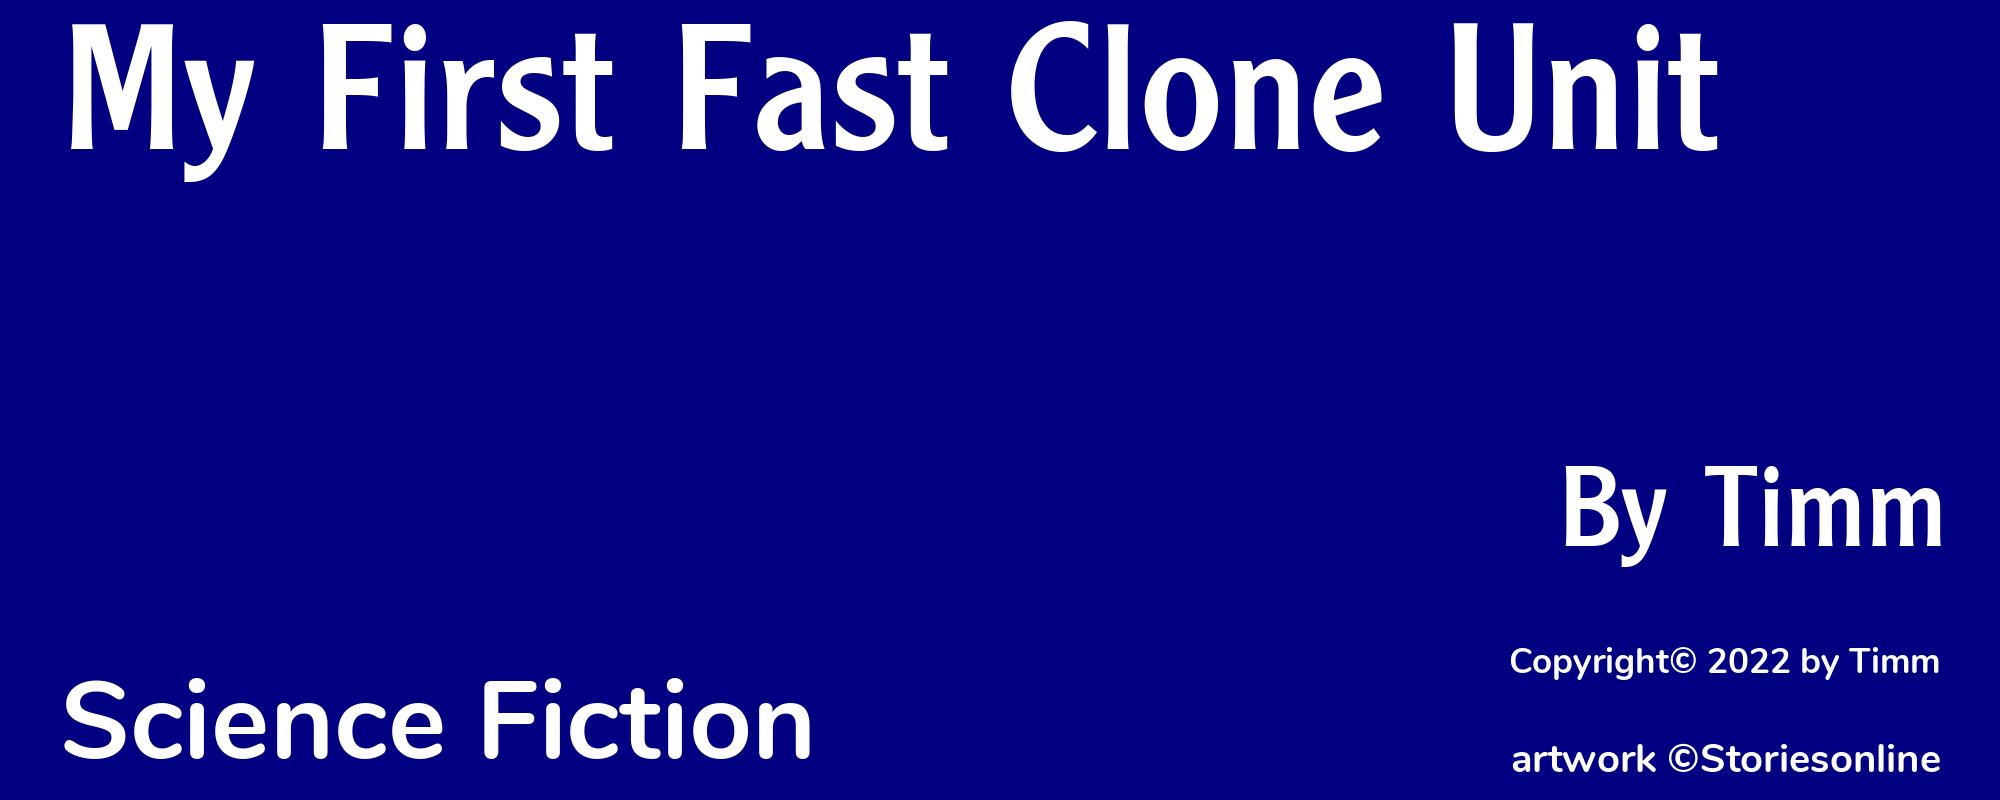 My First Fast Clone Unit - Cover